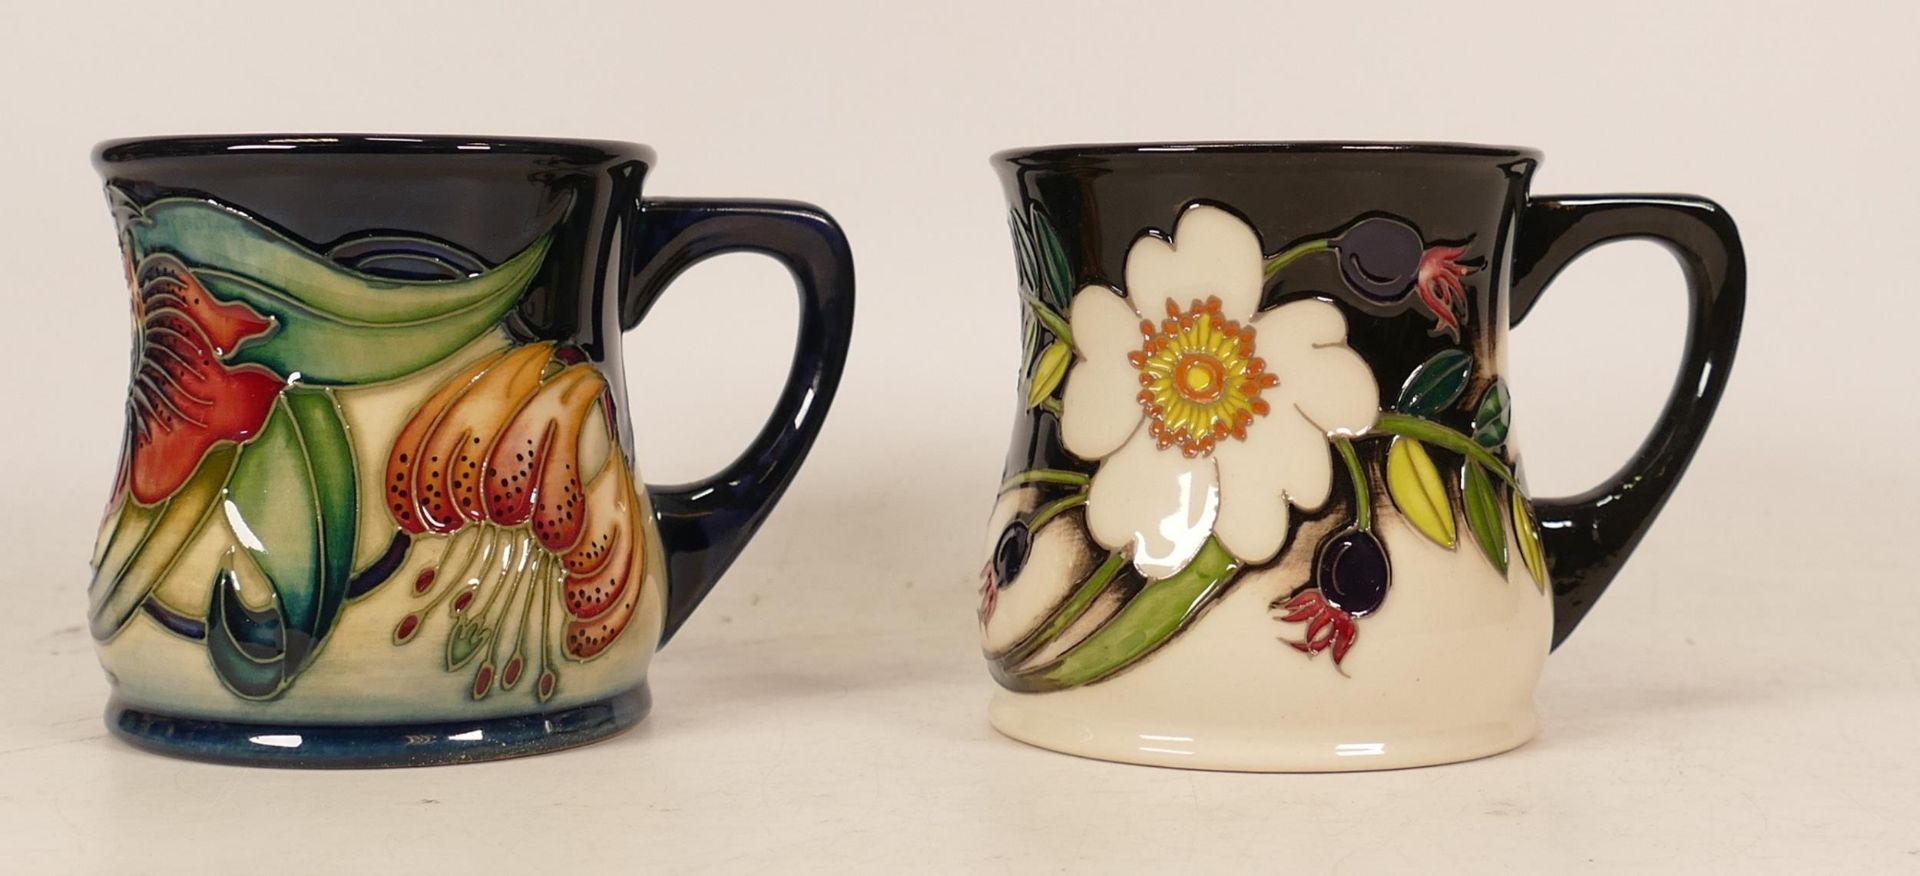 Moorcroft white flowers and berries mug and Anna Lilly mug, boxed (2)